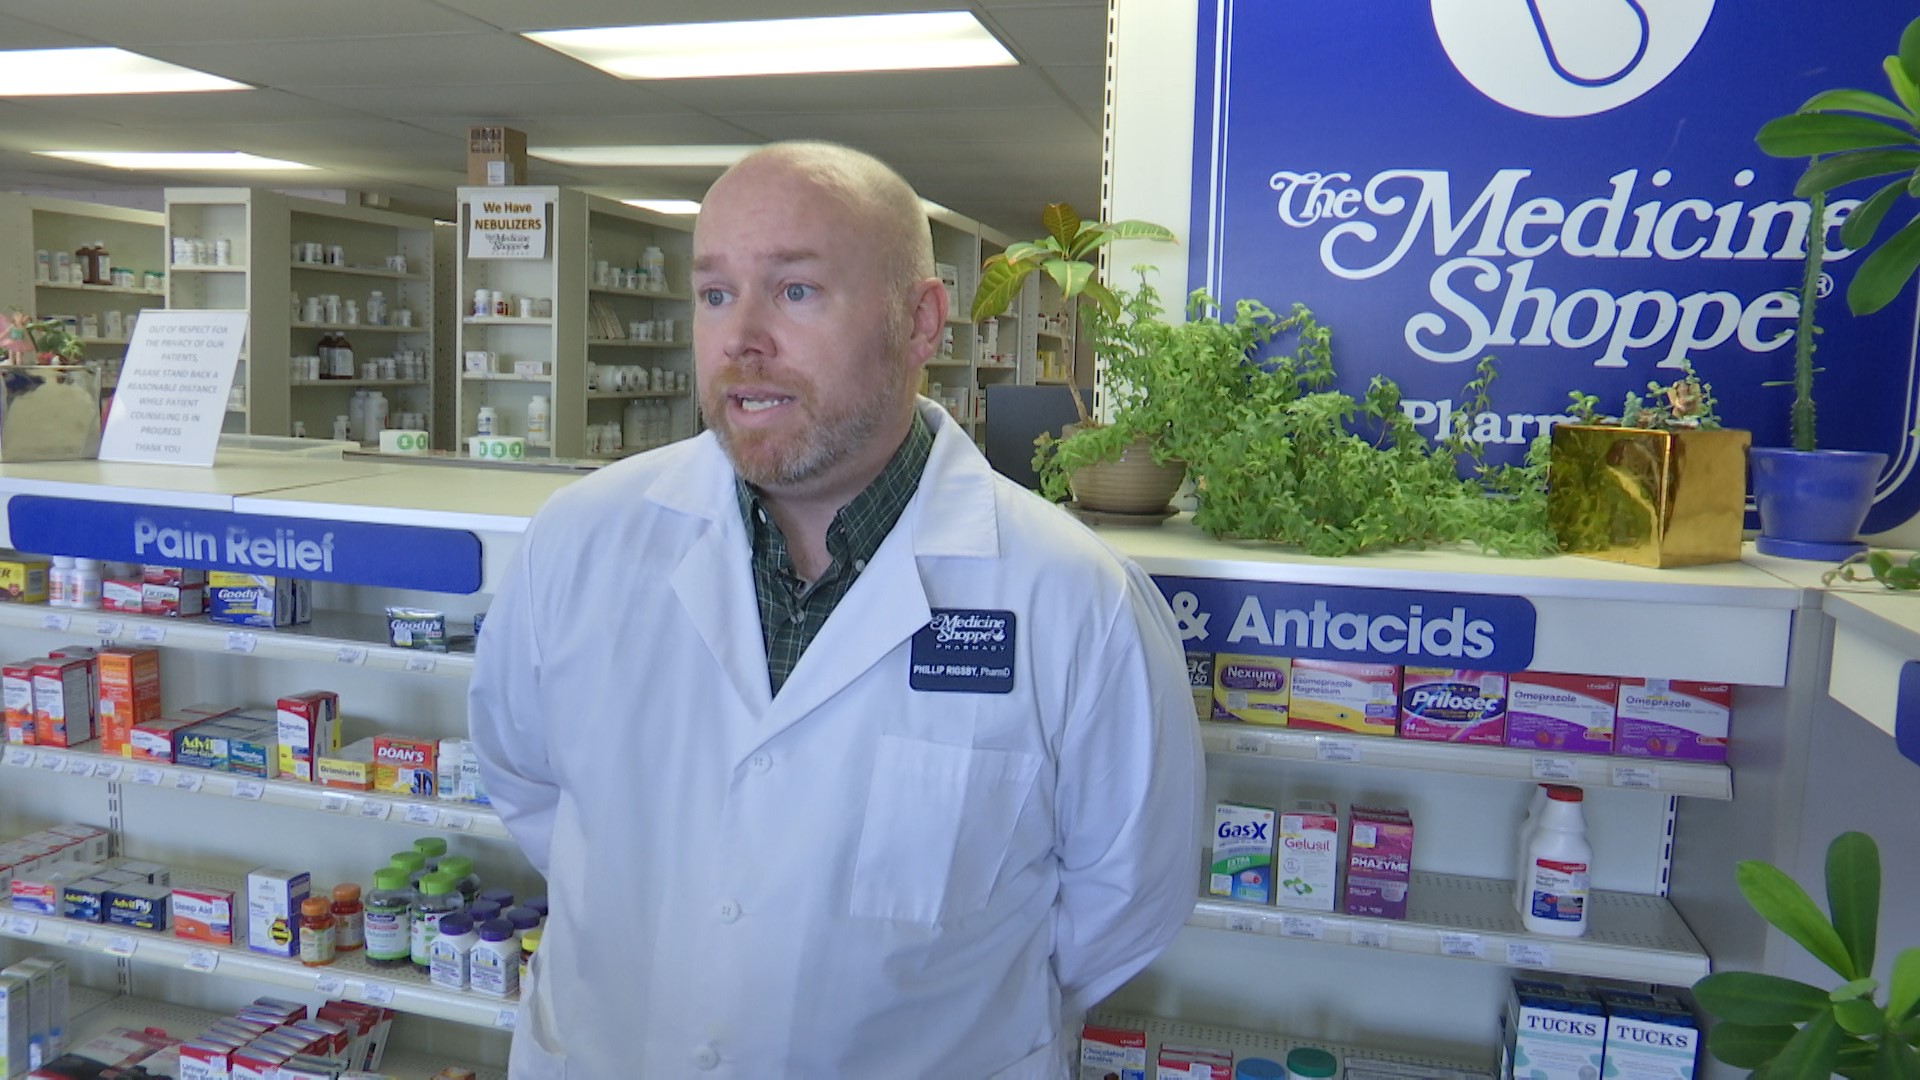 WEB EXTRA: Dr. Rigsby gives advice to Zantac users and breaks down latest FDA reports